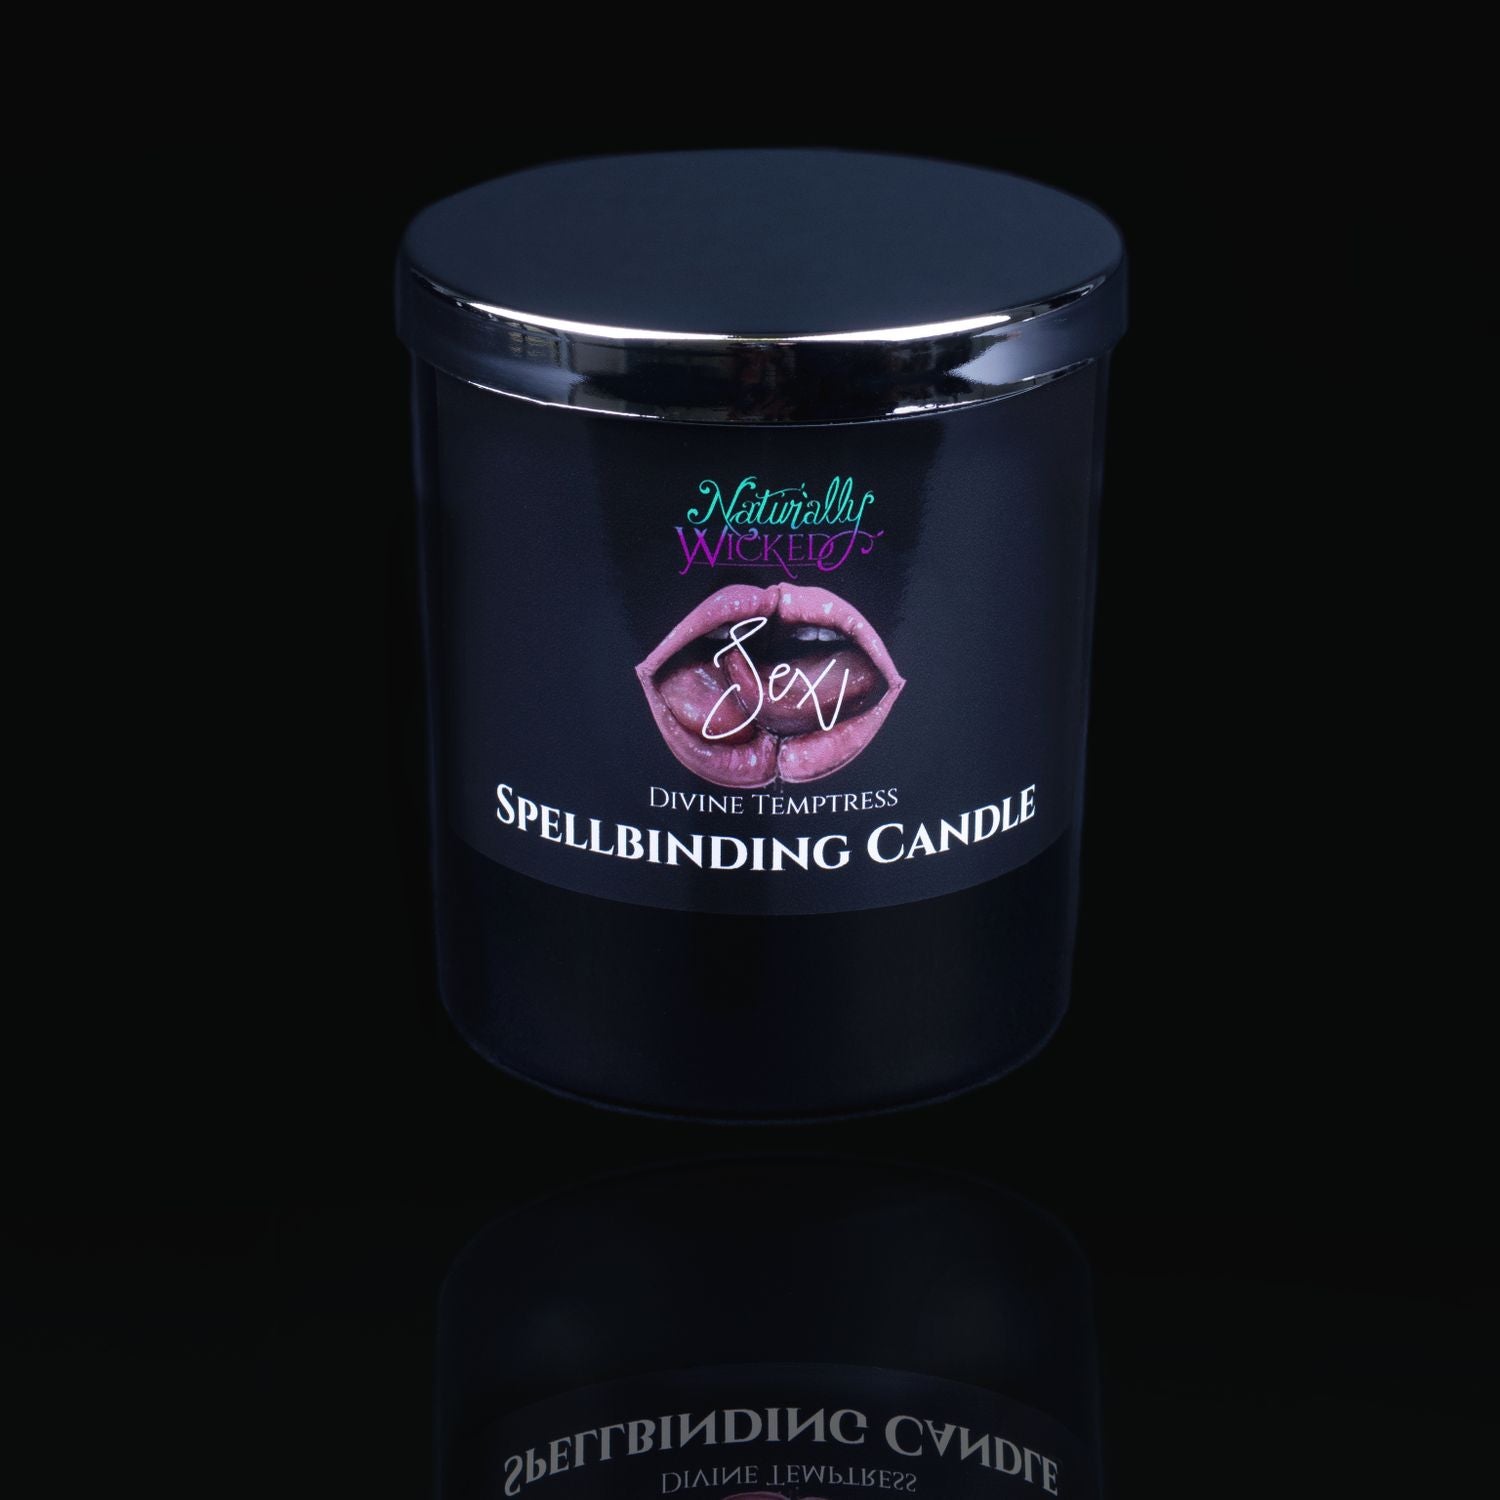 Naturally Wicked Spellbinding Sex Spell Candle With Mirror Finished Exquisite Lid In Place. Featuring A Black Gloss Label And A Pair Of Luscious Lips Kissing Seductively